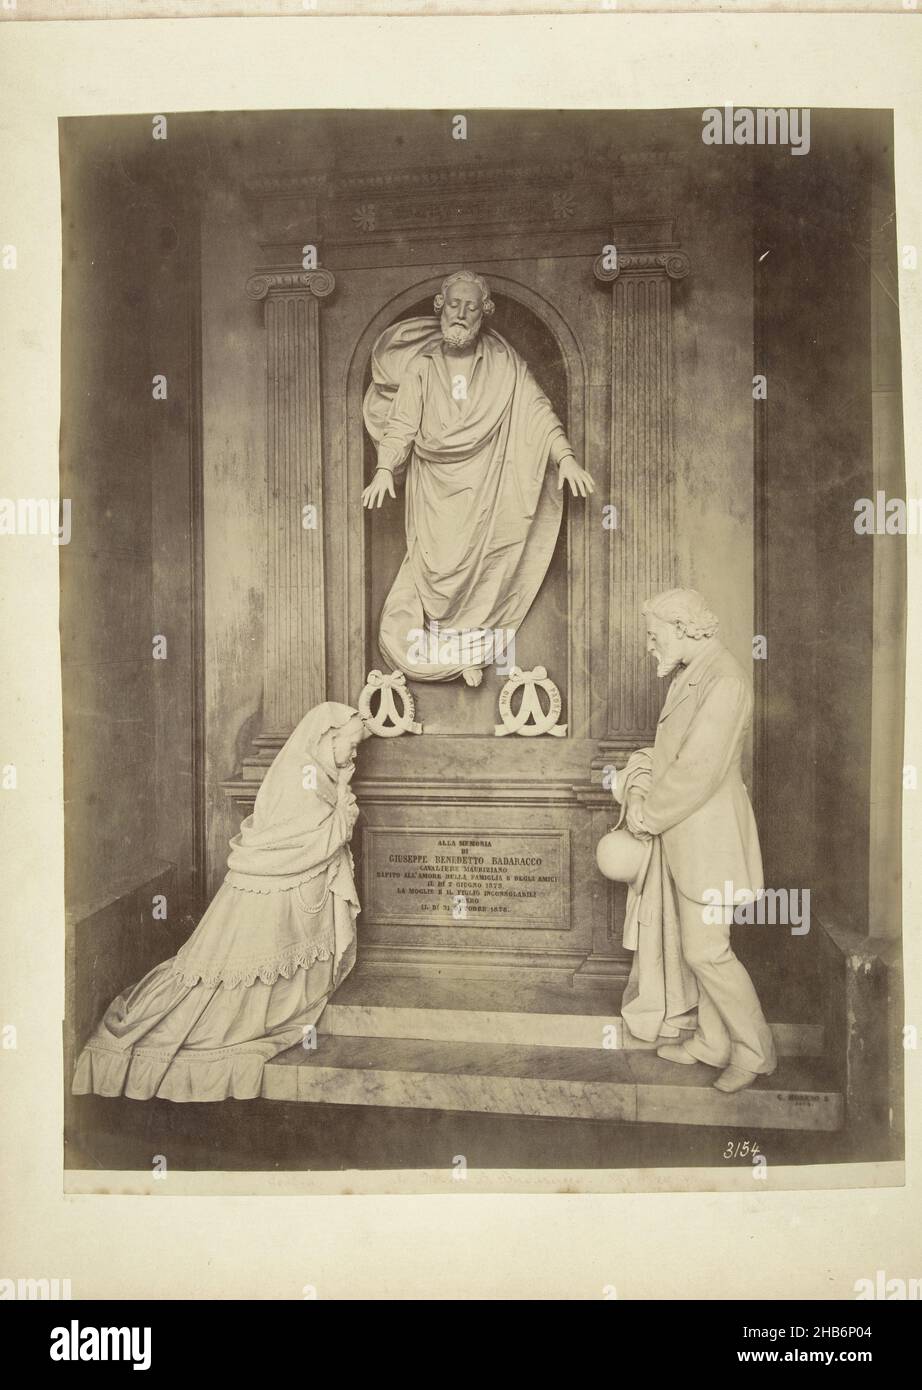 Tomb monument in the Campo Santo of Genoa, A man and woman at the grave of their deceased child, above the grave the lord watches. Tomb monument of Guiseppe Benedetto Badaracco, made by Moreno., Alfredo Noack, anonymous (rejected attribution), Genua, c. 1875, photographic support, albumen print, height 260 mm × width 207 mmheight 277 mm × width 367 mm Stock Photo